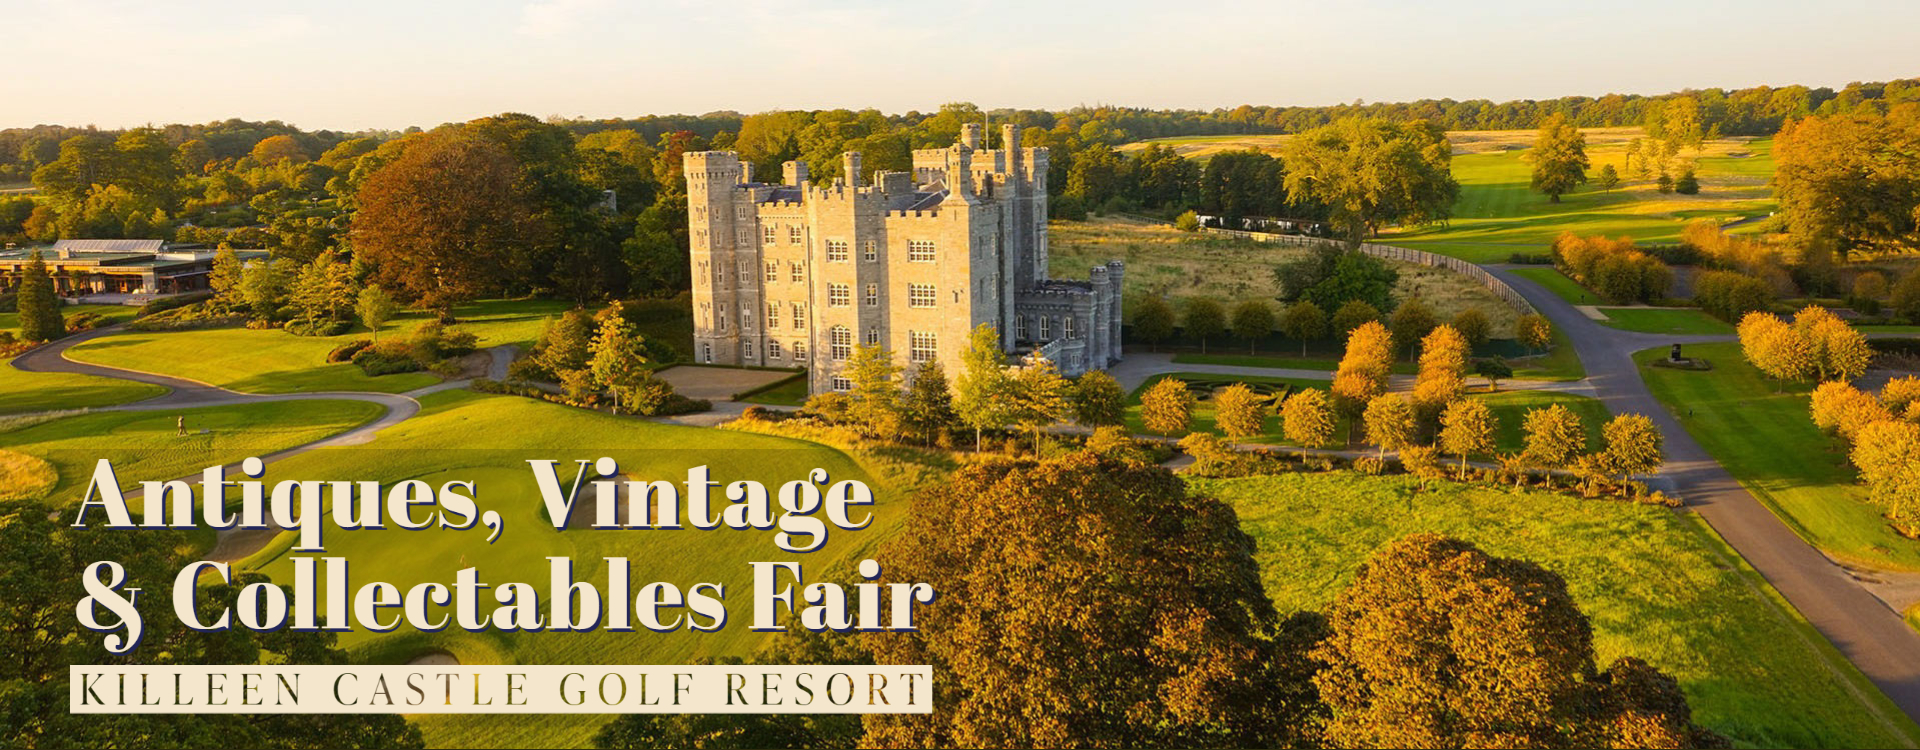 A view of the venue grounds which also features the castle. The overlaid text reads: Antiques, Vintage & Collectables Fair, Killeen Castle Golf Resort.